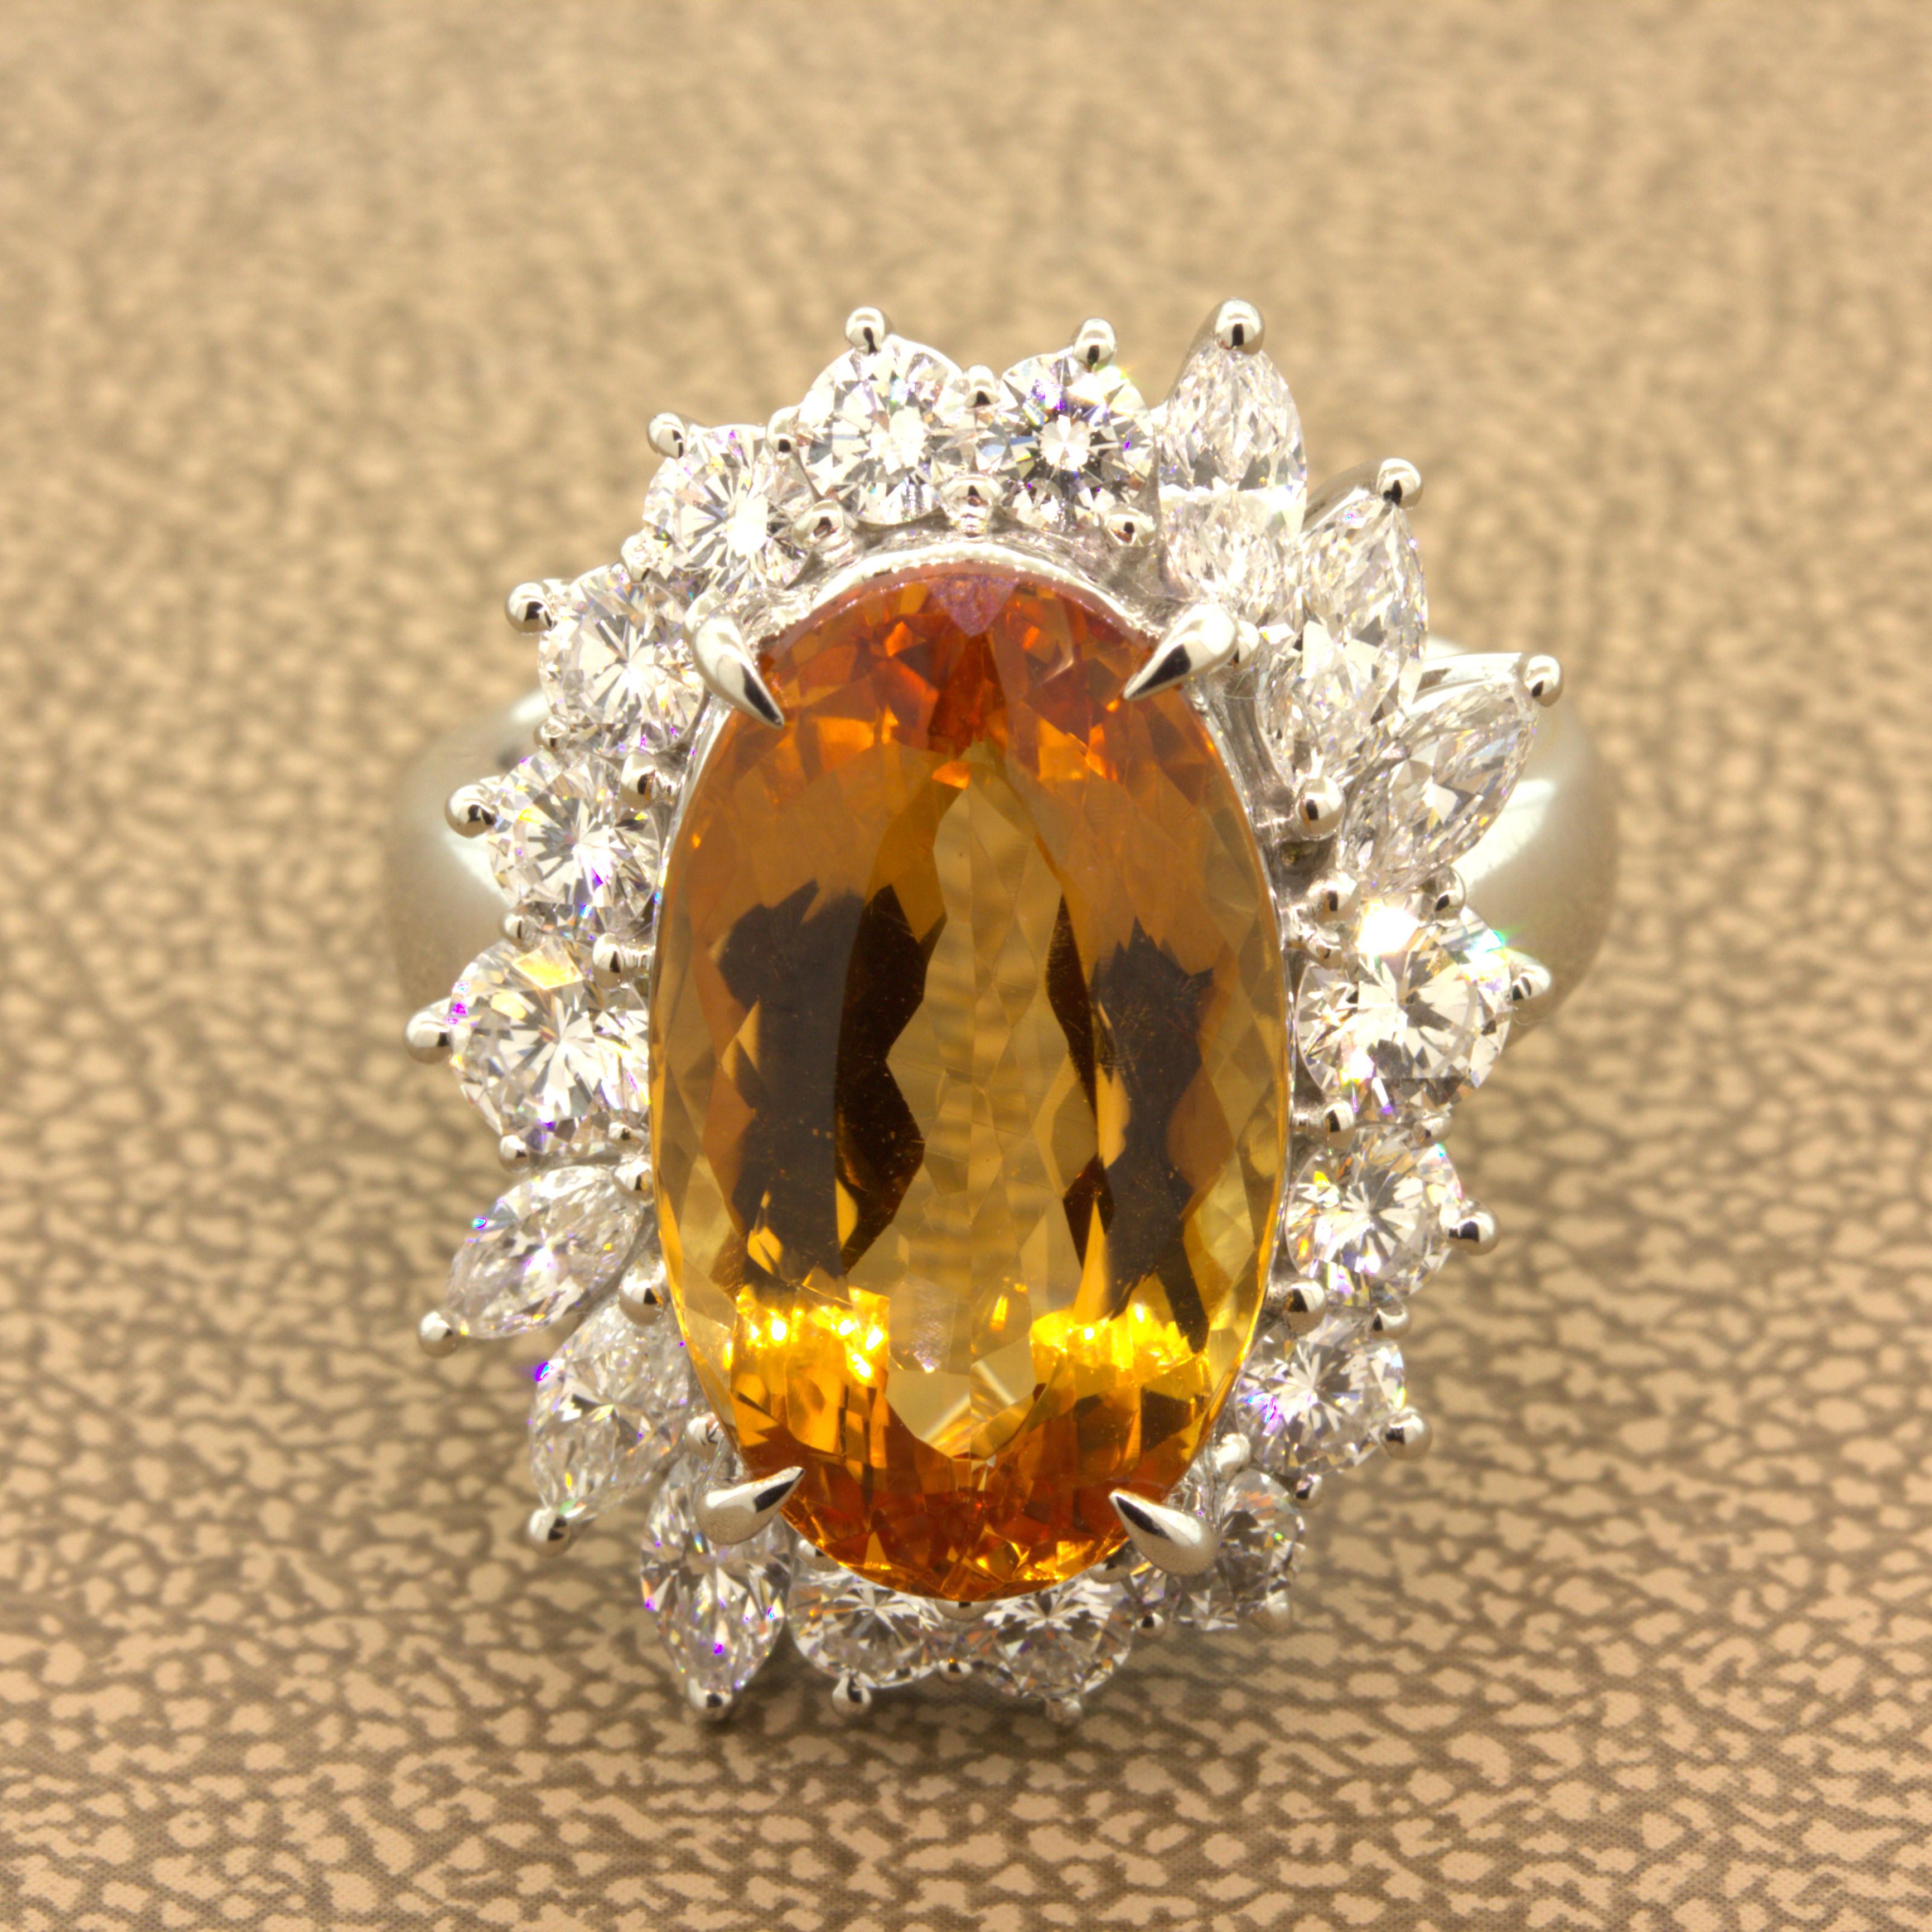 As good as it gets! This absolutely gorgeous platinum ring is one of our favorites in our entire collection! It features a long oval-shape imperial topaz, weighing 9.60 carats, with a rich intense golden orange/red color that scintillates in the